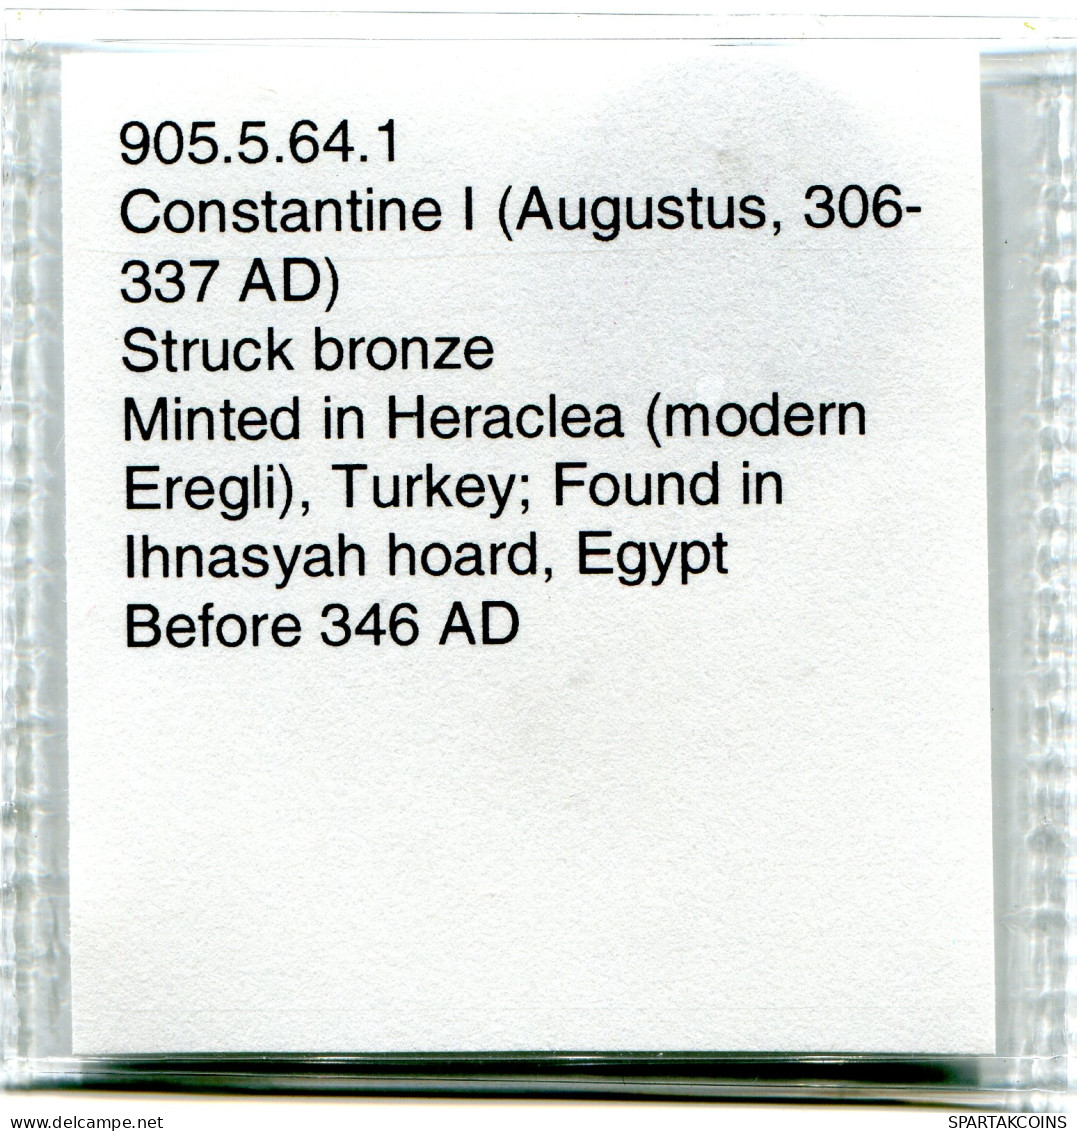 CONSTANTINE I MINTED IN HERACLEA FOUND IN IHNASYAH HOARD EGYPT #ANC11196.14.F.A - El Imperio Christiano (307 / 363)